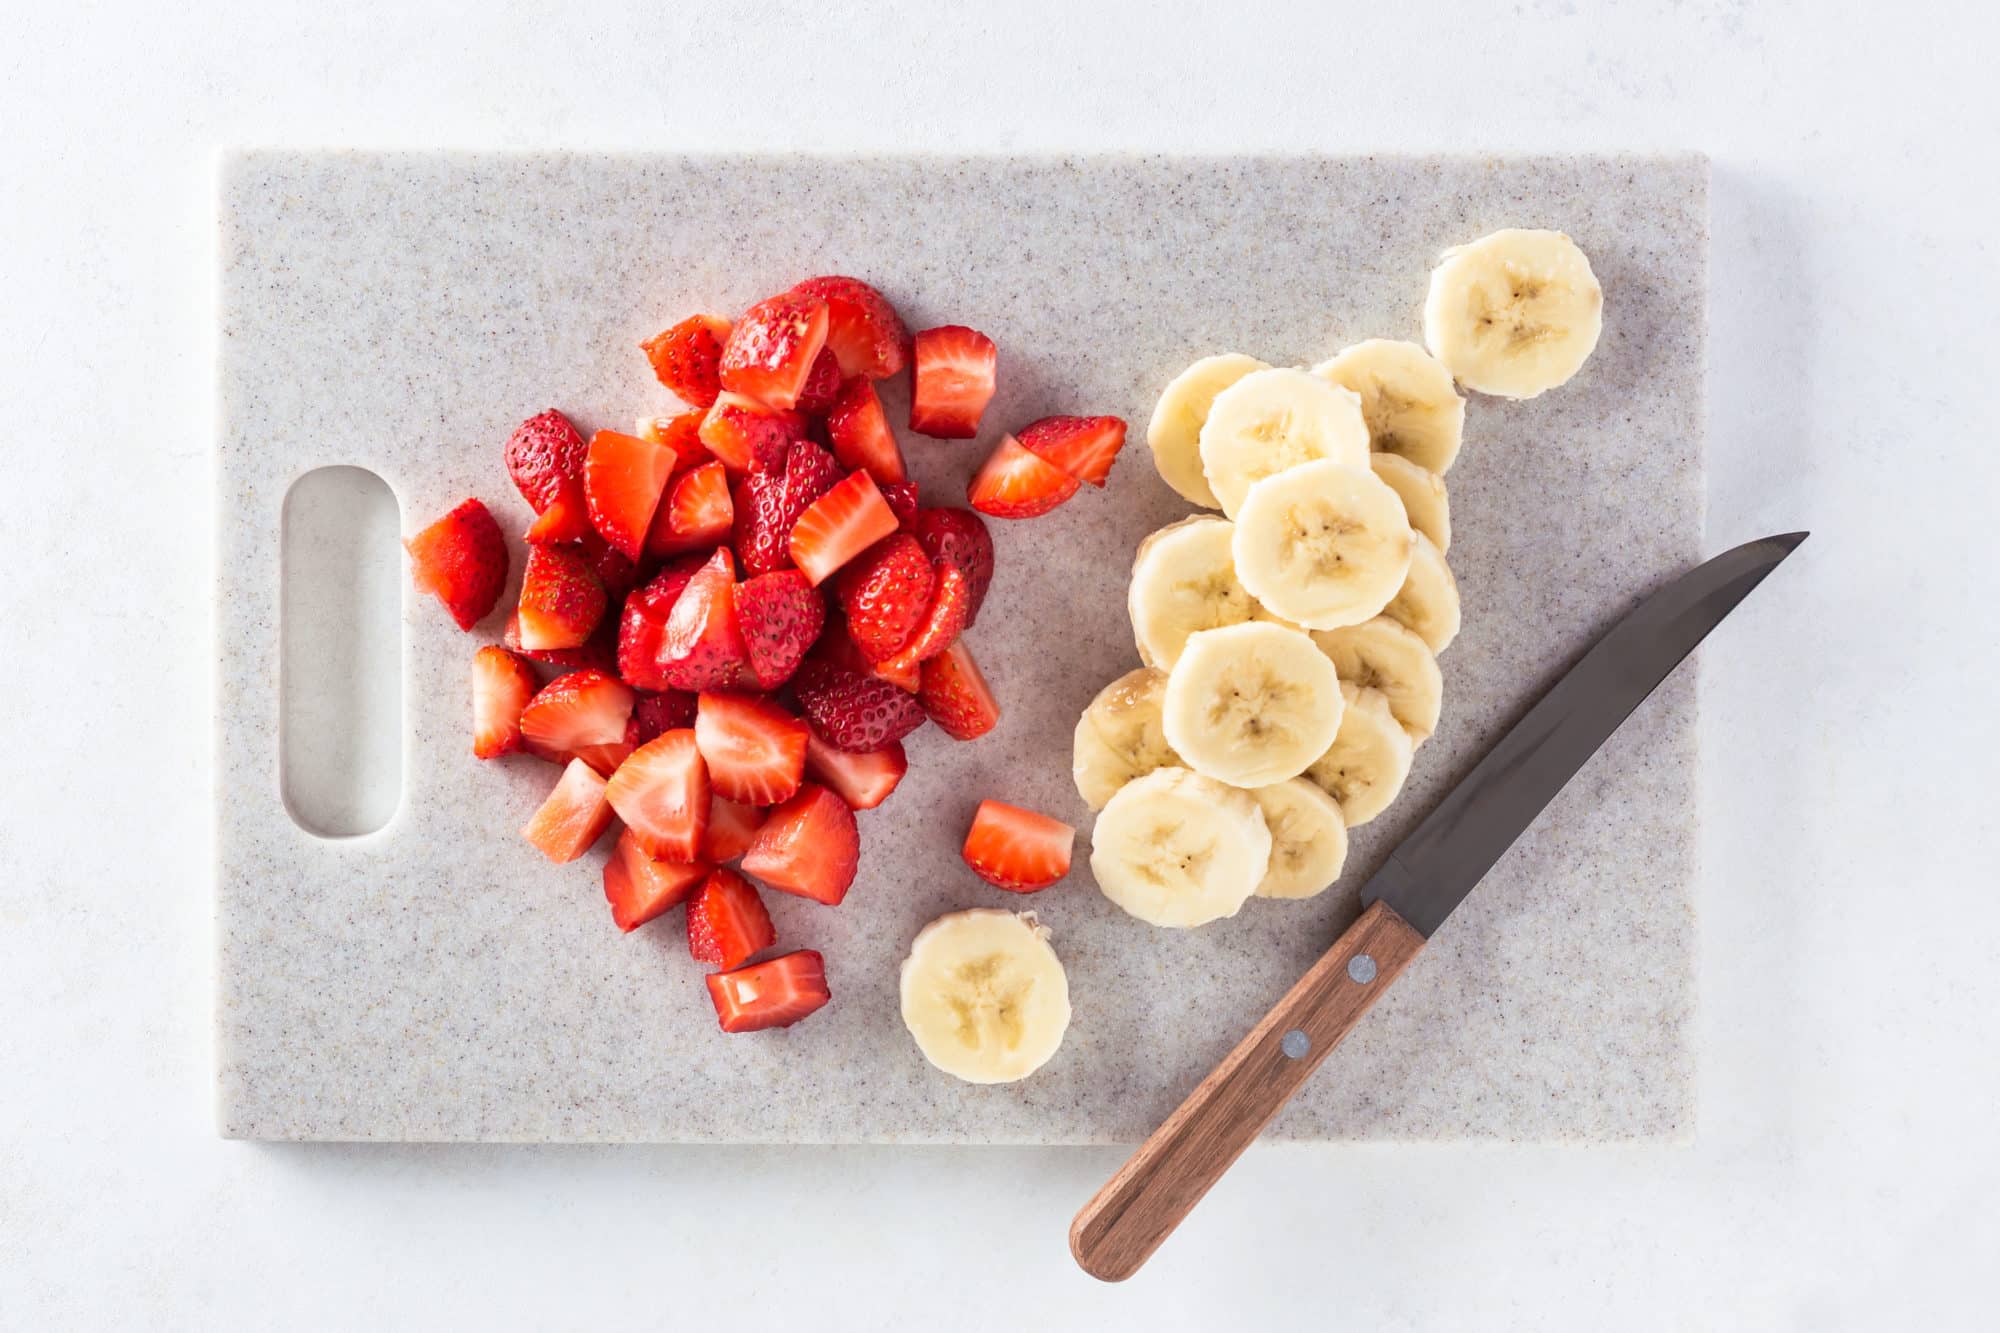 A cutting board with sliced strawberries and bananas and a knife. 